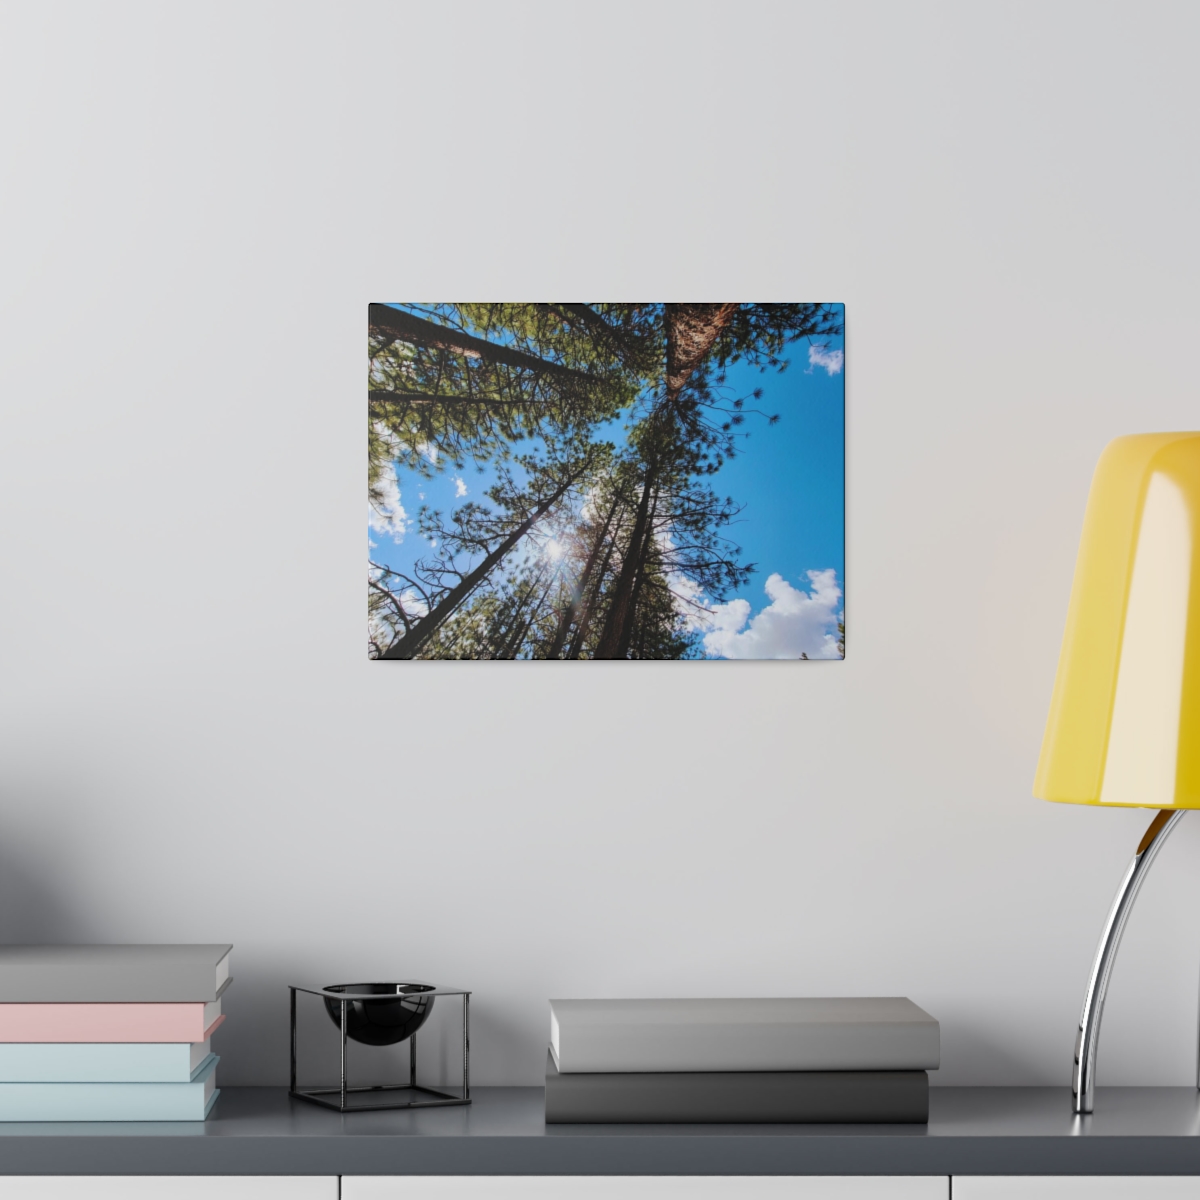 Matte Canvas, Stretched, 0.75" product thumbnail image